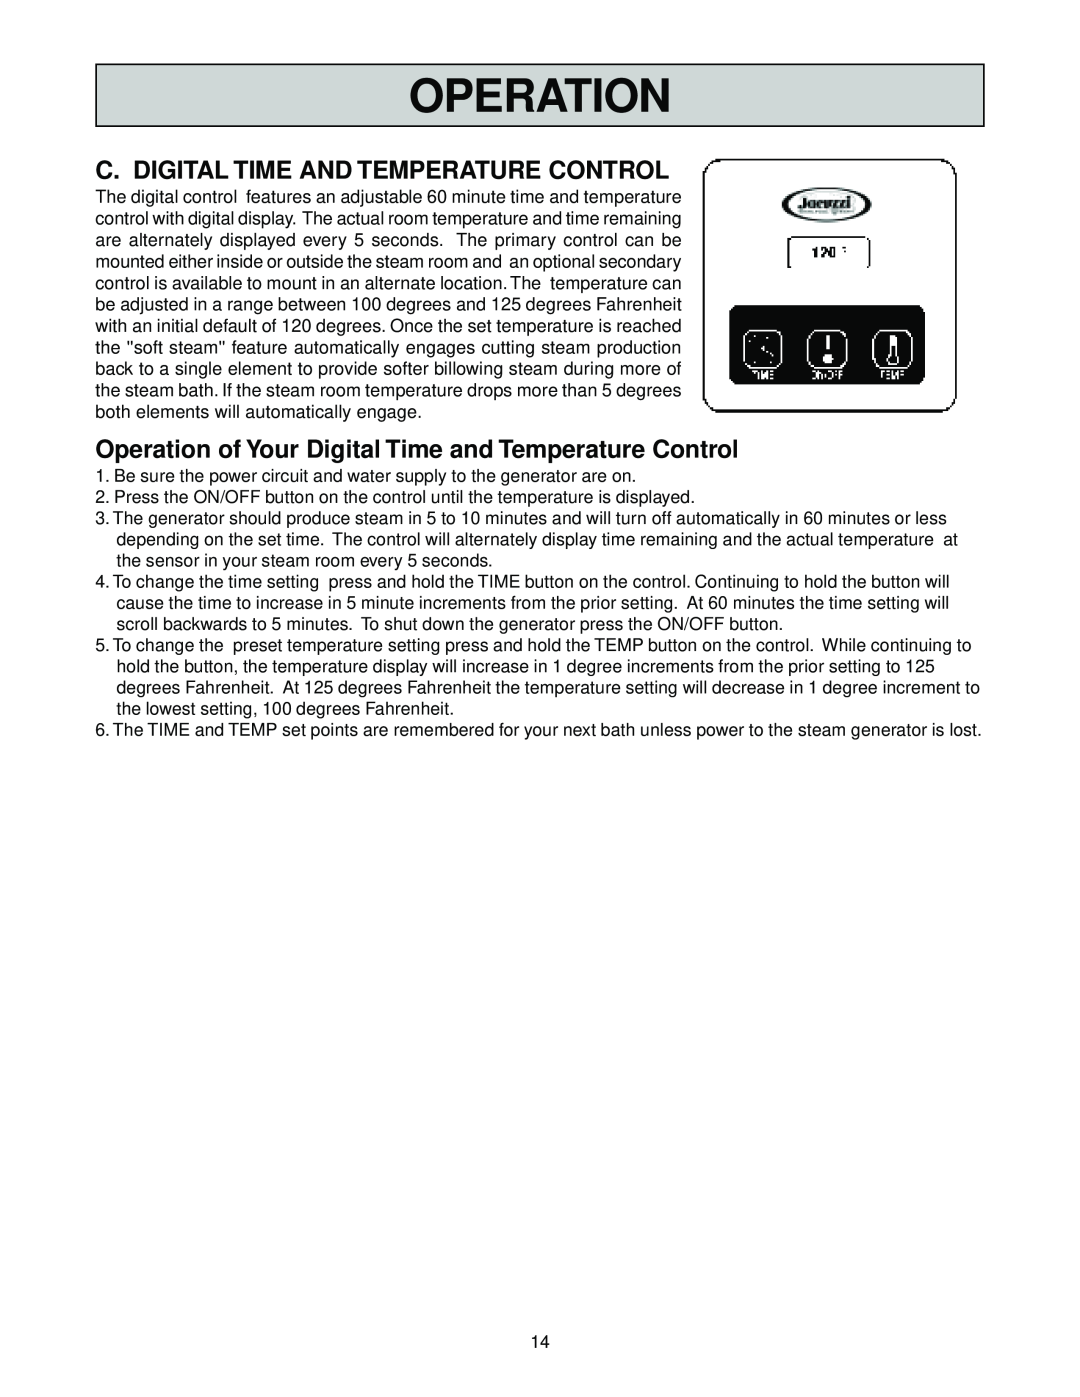 Jacuzzi SteamPro manual C. Digital Time And Temperature Control, Operation of Your Digital Time and Temperature Control 